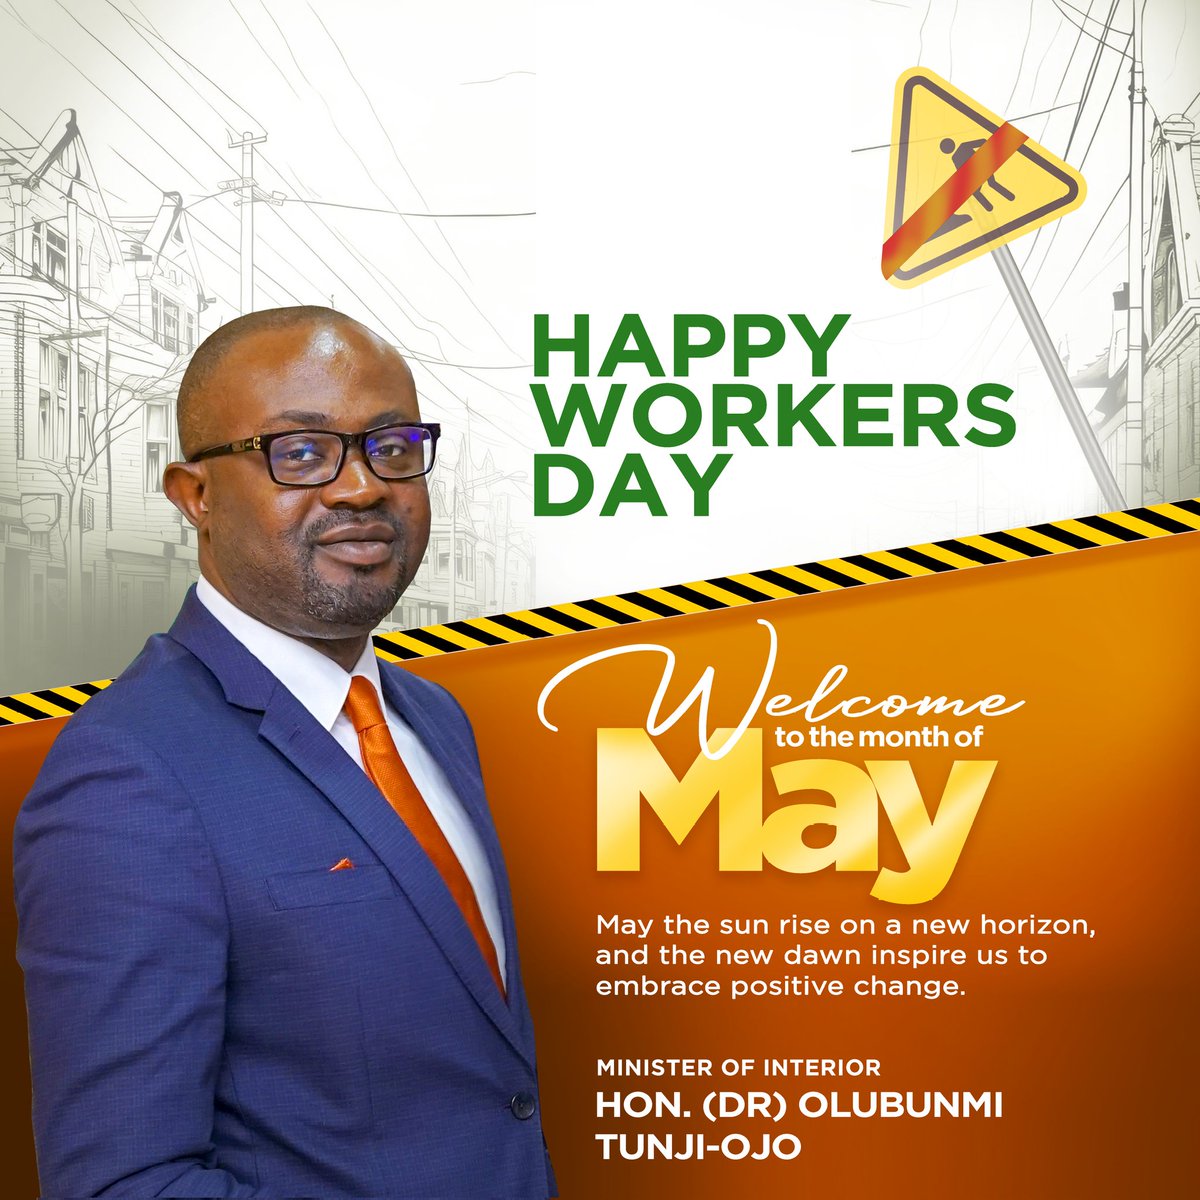 Happy Workers' Day Welcome to the month of May